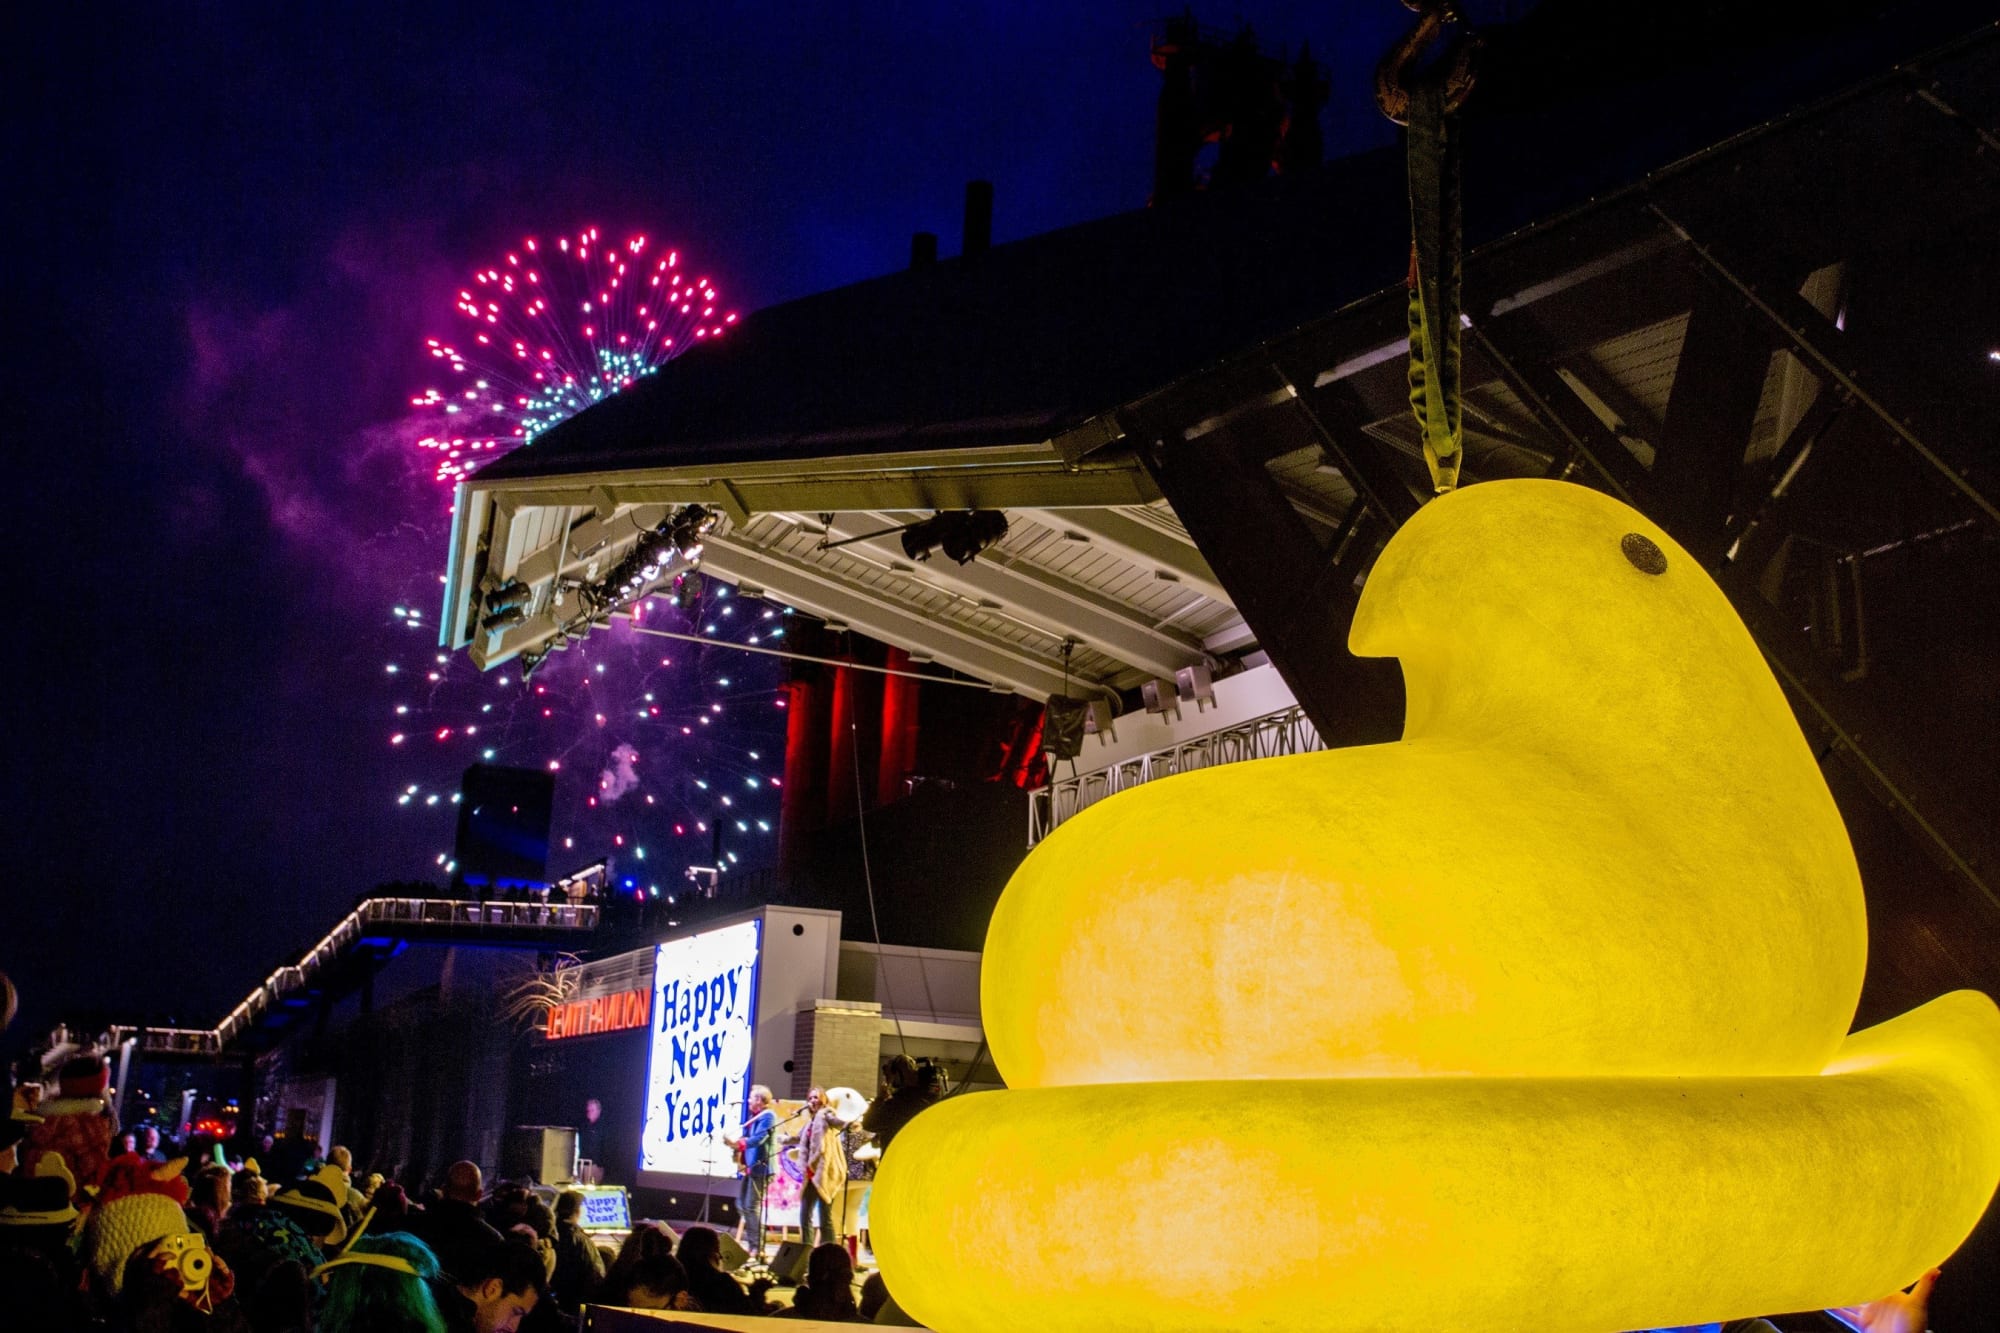 2022 PEEPSFEST rings in the new year with a big PEEPS announcement